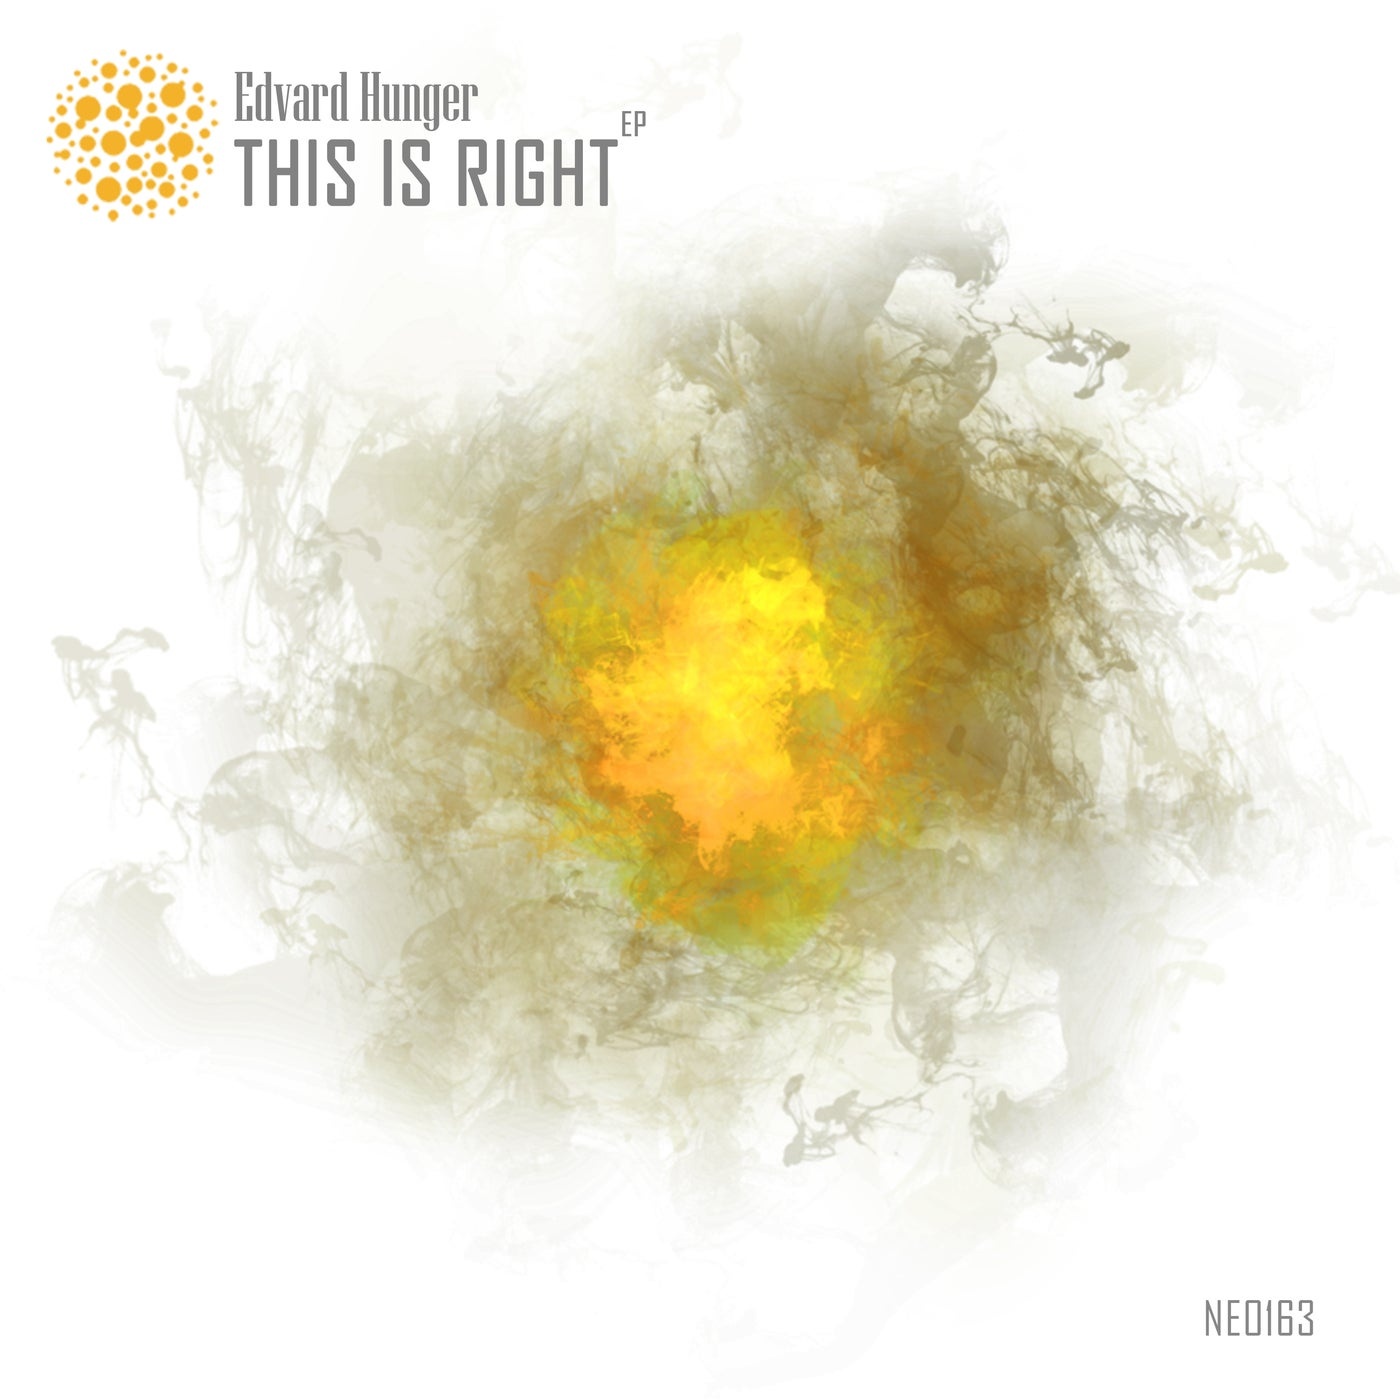 Edvard Hunger - This Is Right EP [NEO163]